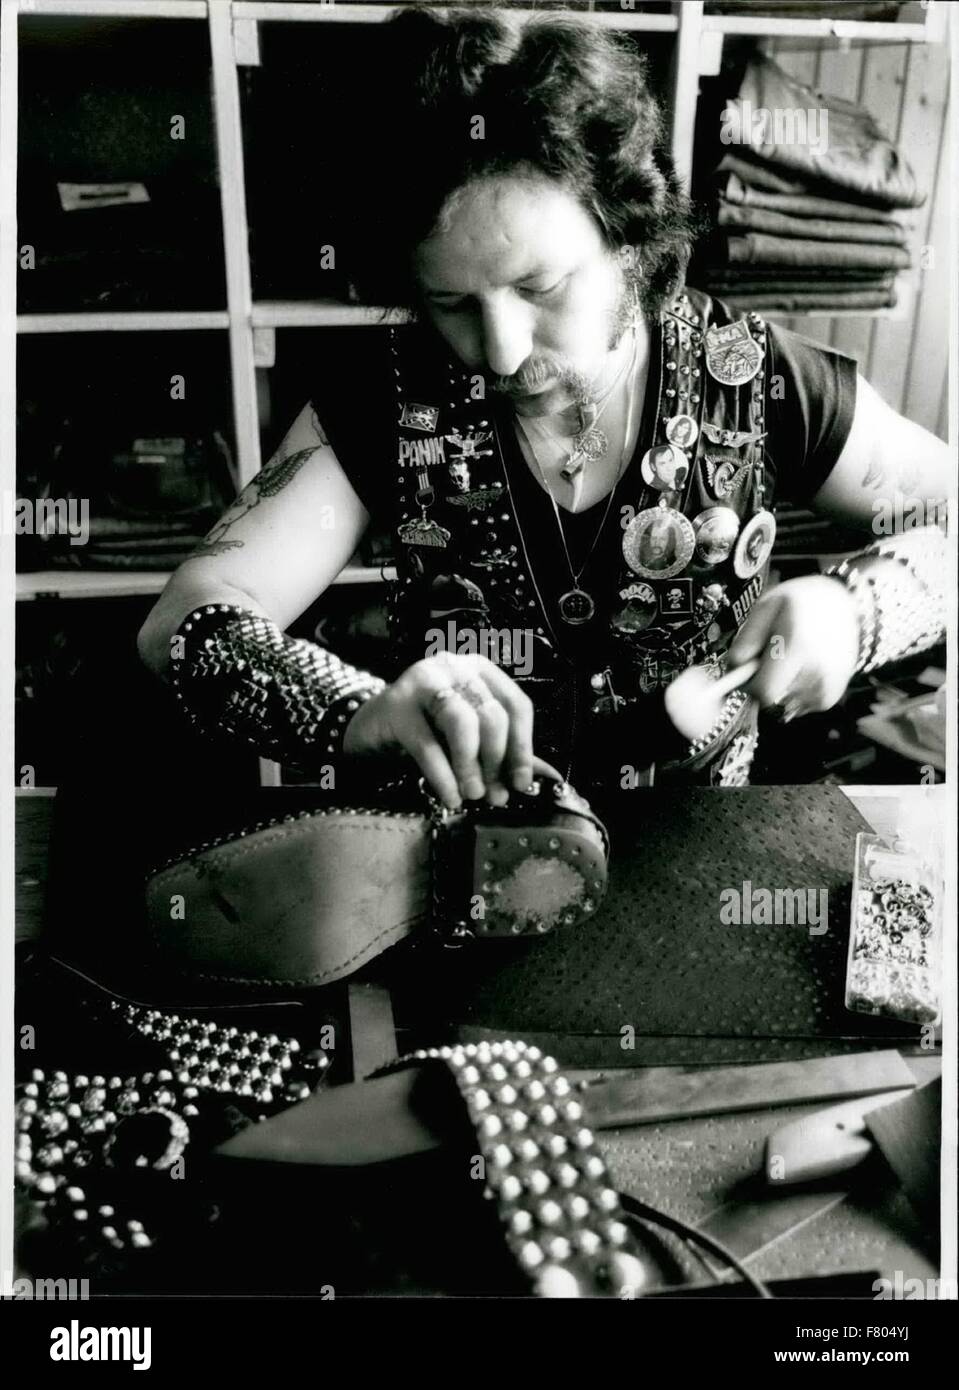 1981 - It was a hard work for a hard man : To finish his leather-jacket. James Schroder, 29 needed more than 8000 rivets and glittering stones for his work. When he started hammering the rivets for the jacket it was a hobby for James, but now his hobby became his profession: in a shop on Hamburg's world famous reeperbahn James hammers for other people who love rivets and leather (our picture). They have to pay for one rivet one mark, for a glittering stone 1.20 mark. He is riveting everything, even bras. The only thing he wouldn't do is to make a similar jacket like his own jacket, which has t Stock Photo